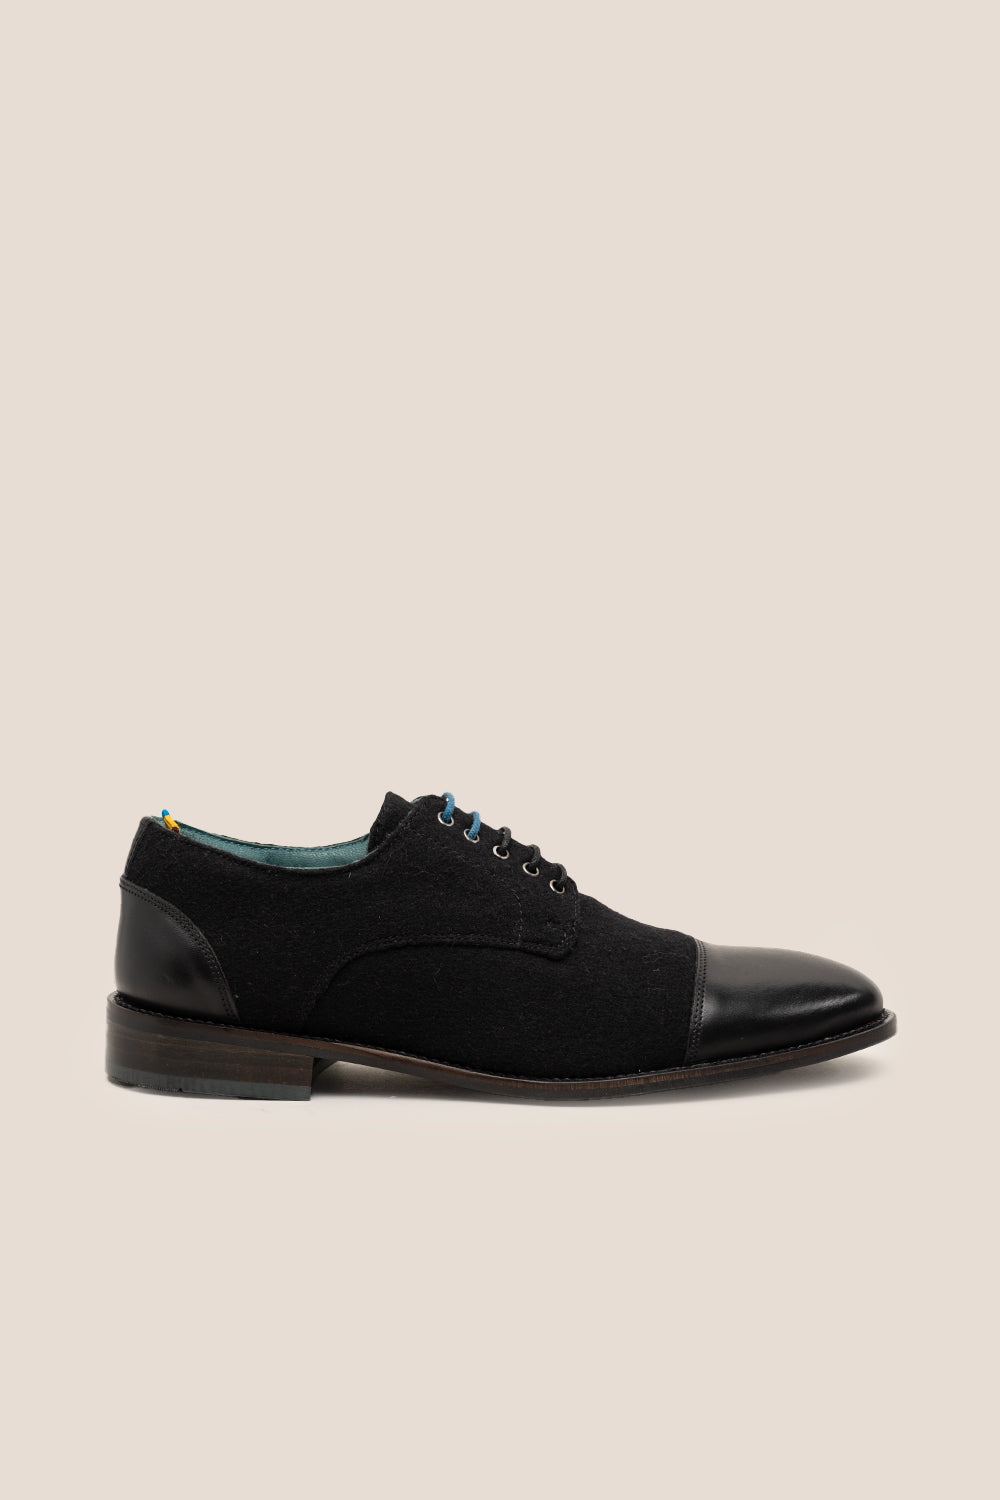 Thomas black leather and felt mens shoes Oswin Hyde